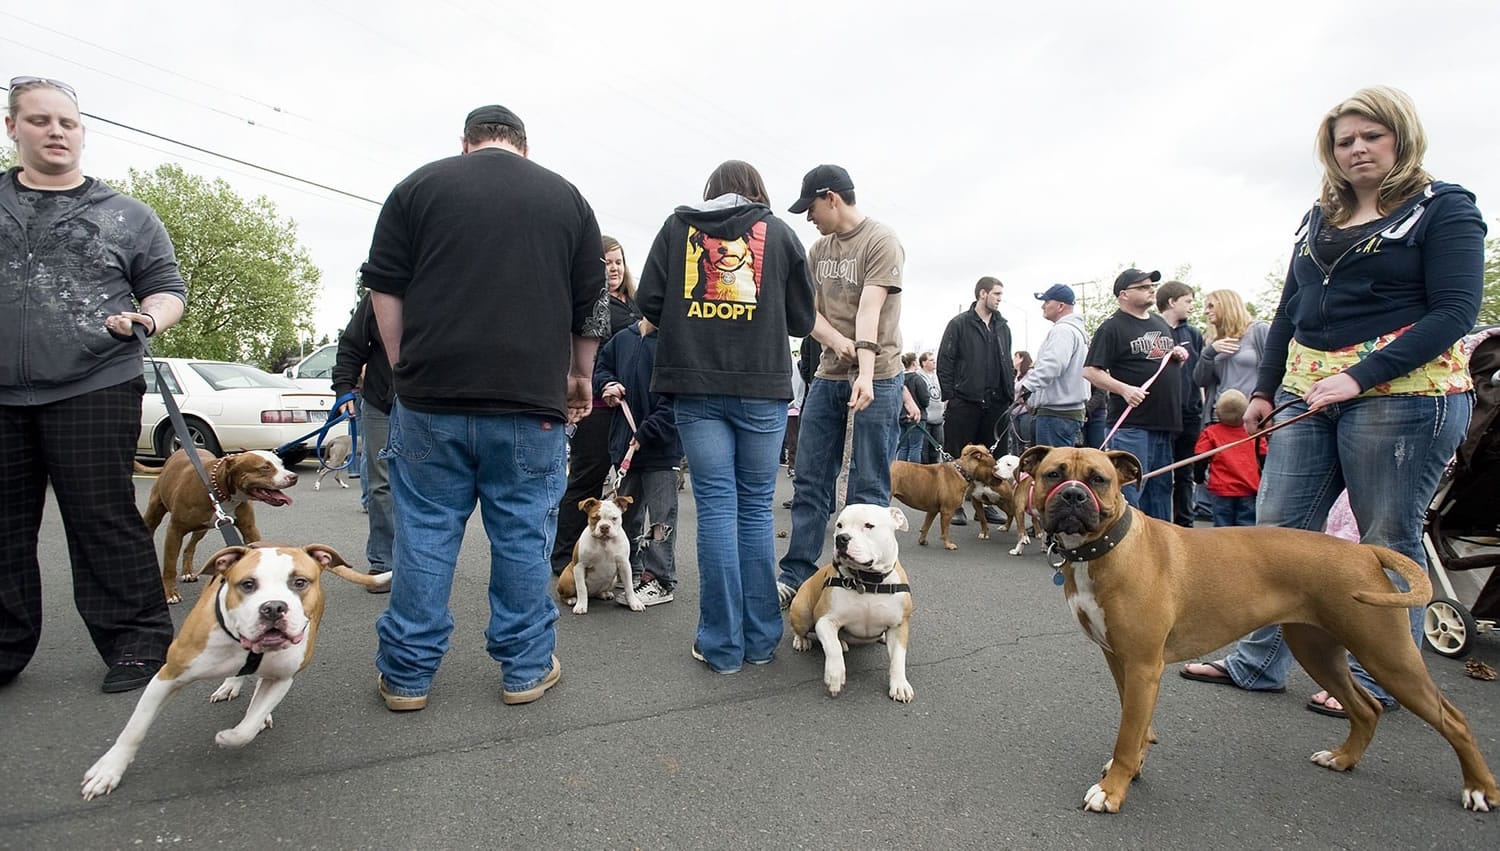 The dozens of pit bulls barked, but did not bite, during Wednesday's protest.